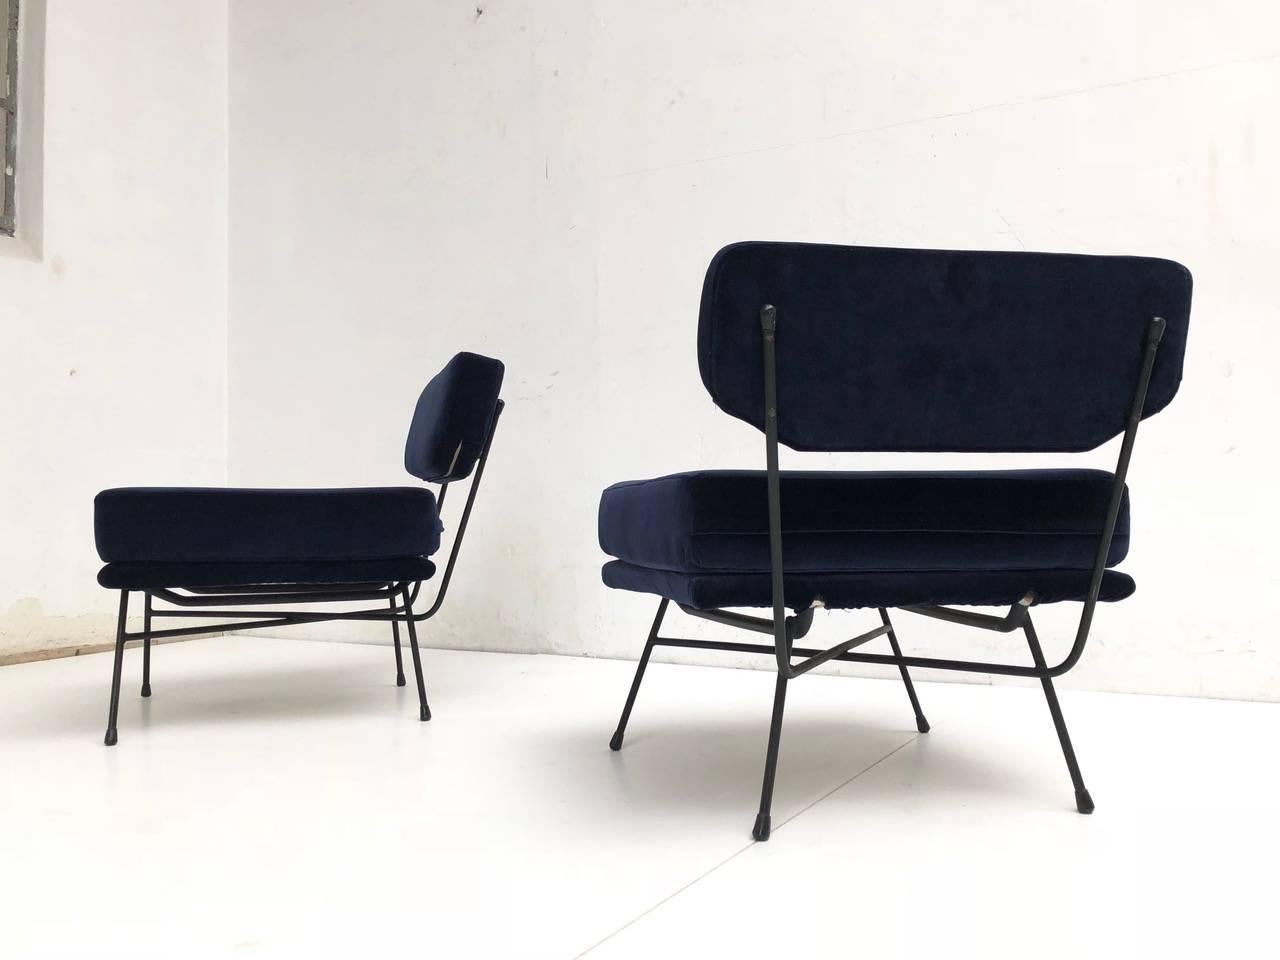 Pair of 'Elettra' Lounge Chairs by BBPR , Arflex, Italy 1953, Compasso D'Oro 1954 2